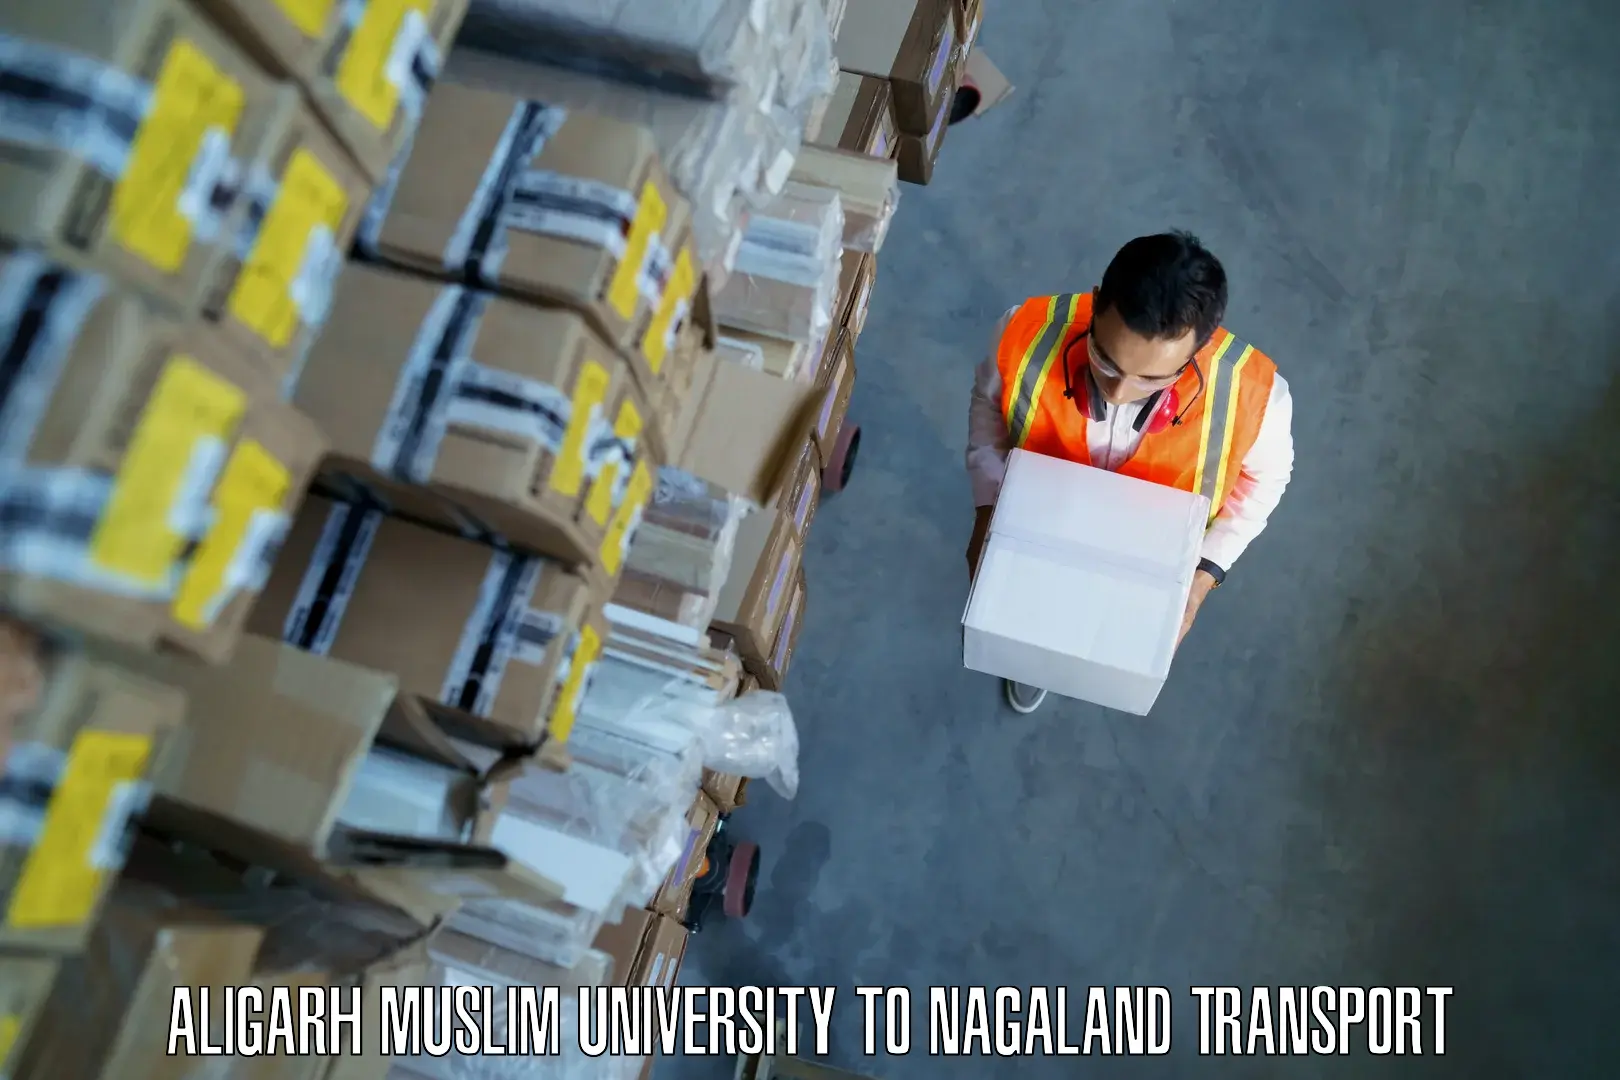 Land transport services in Aligarh Muslim University to NIT Nagaland